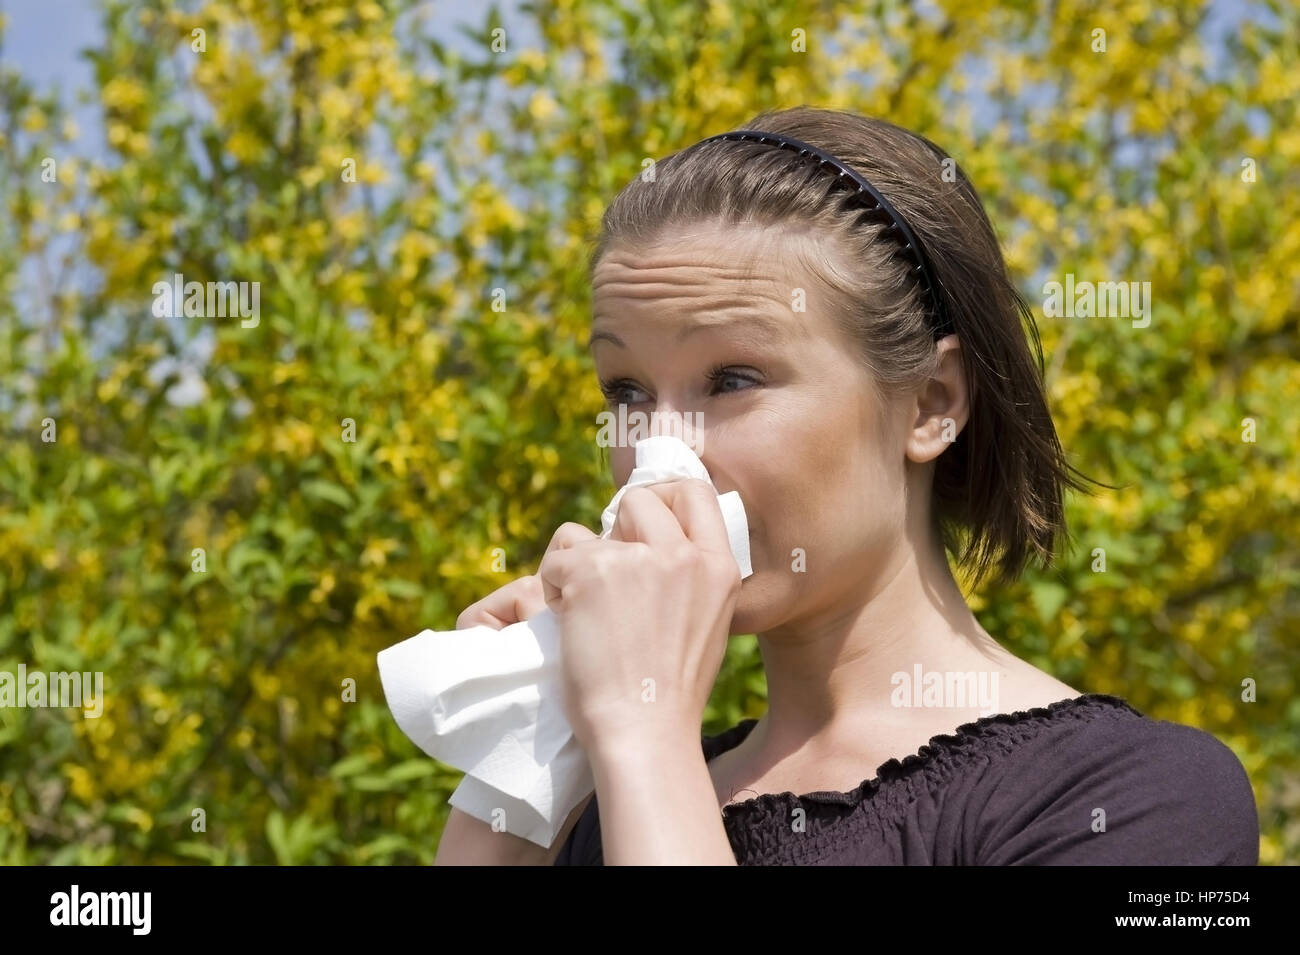 Model released, Junge Frau mit Pollenallergie im Fruehling - woman with pollen allergy Stock Photo